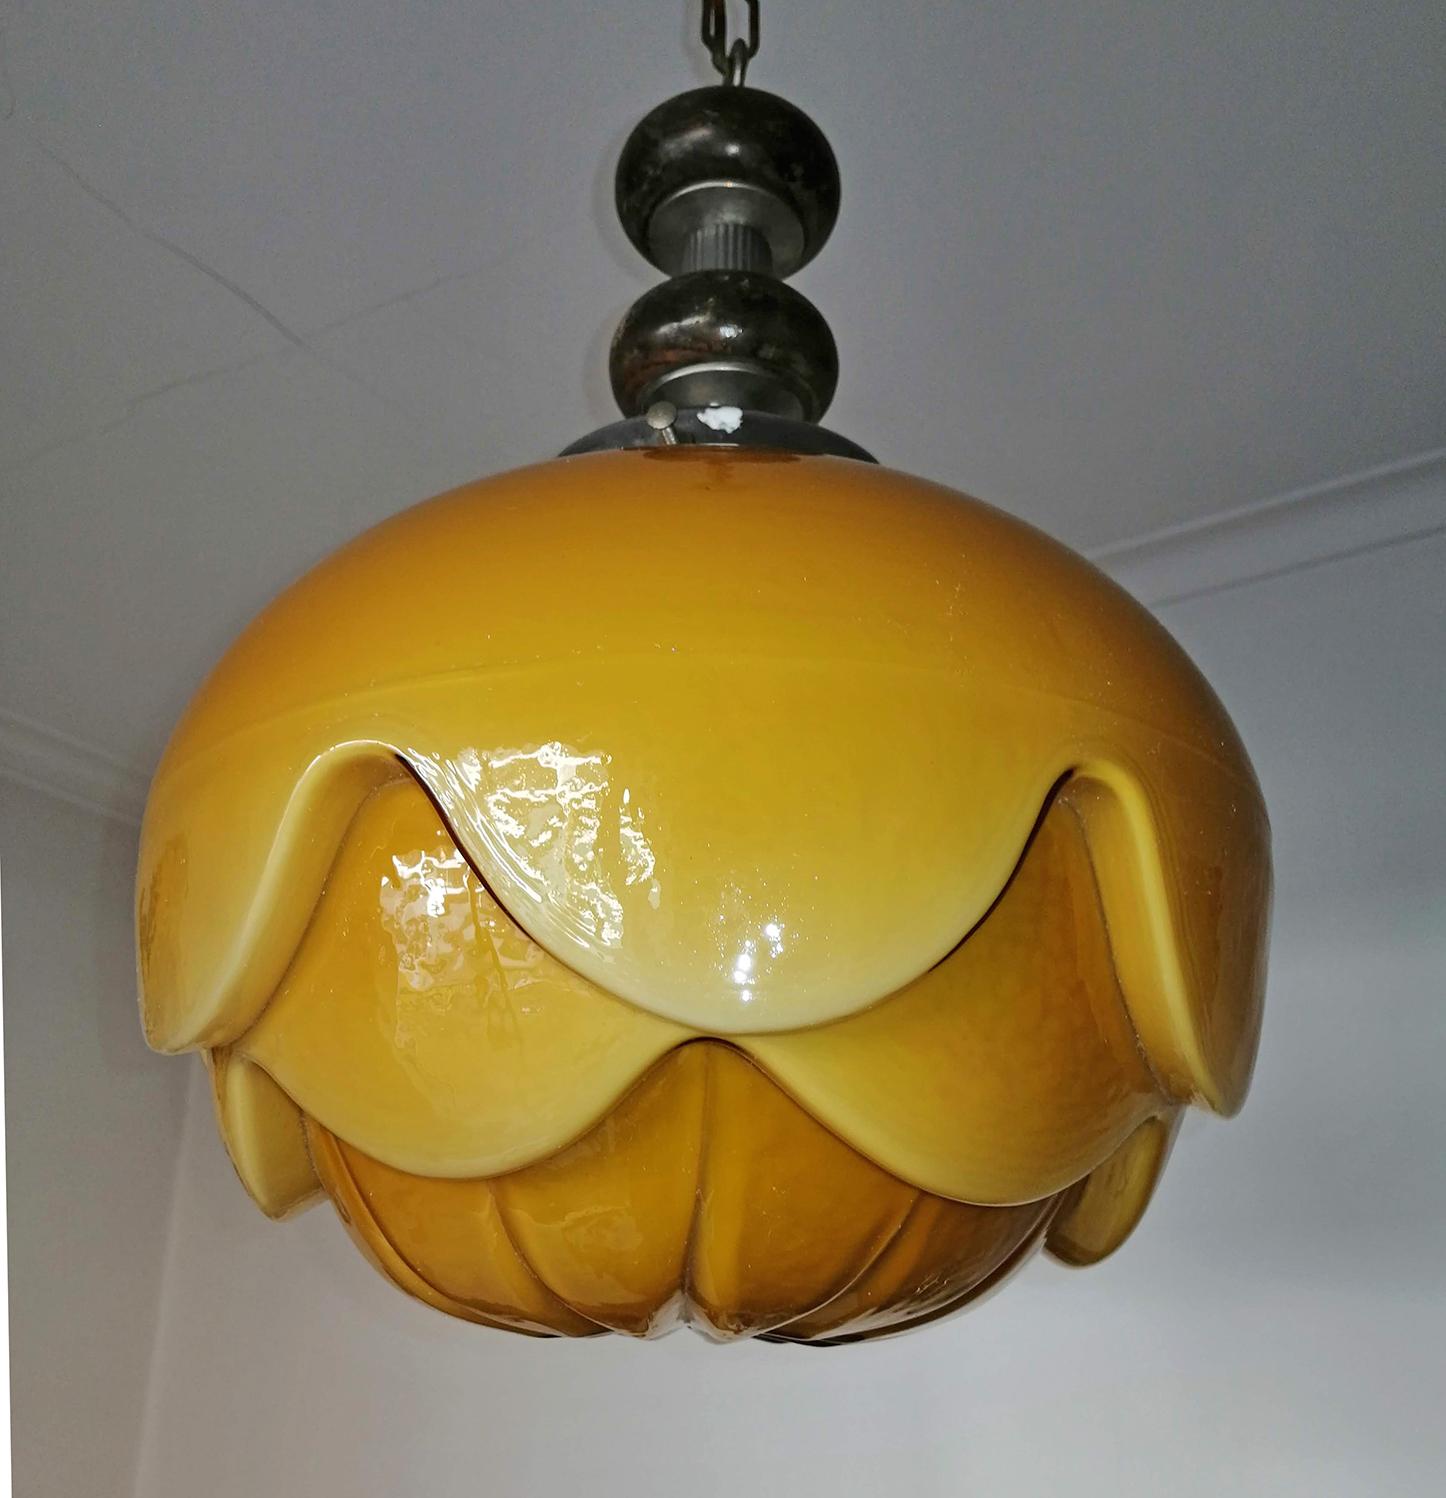 Hand-Crafted Gorgeous Large Bauhaus Art Deco Opaline Amber Glass Shade Pendant Chandelier